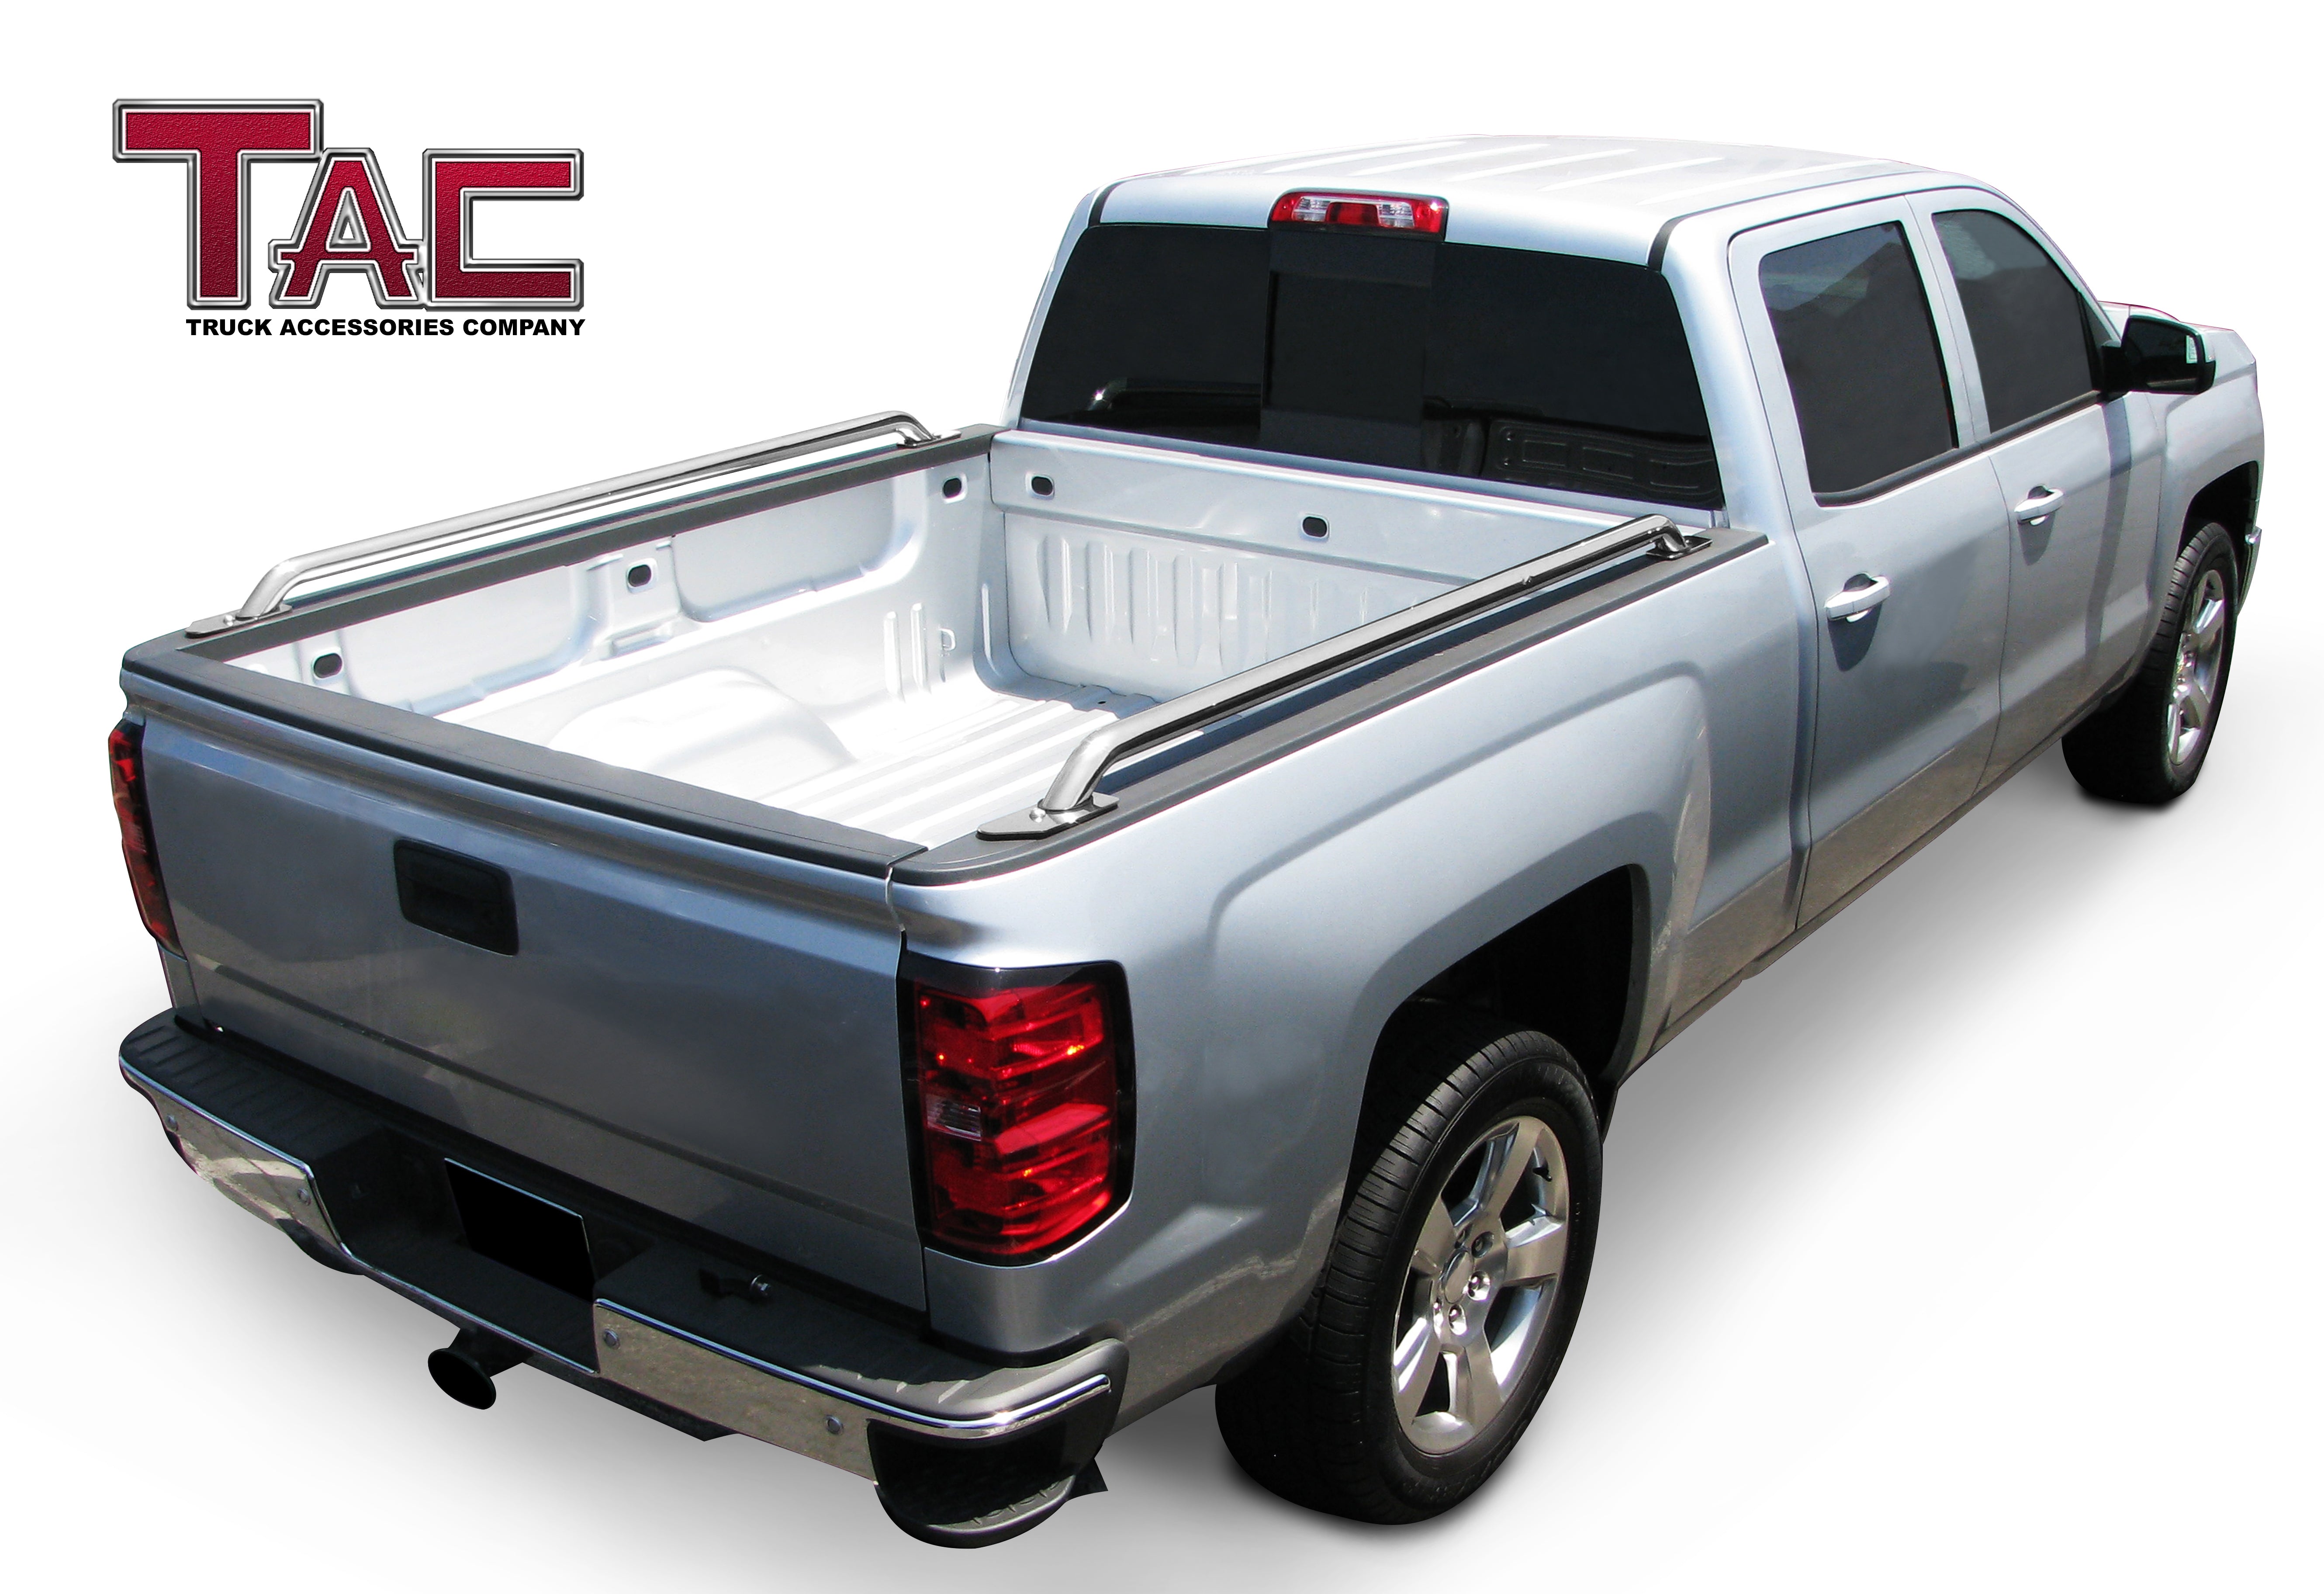 TAC Bed Rails Compatible with 2015-2021 Chevy Colorado/GMC Canyon 6' Standard Bed | 1992-2011 Ford Ranger 6' Standard Bed | 2000-2006 Toyota Tundra 6.4' Standard Bed 304 Stainless Steel Truck -1 Pair - 0